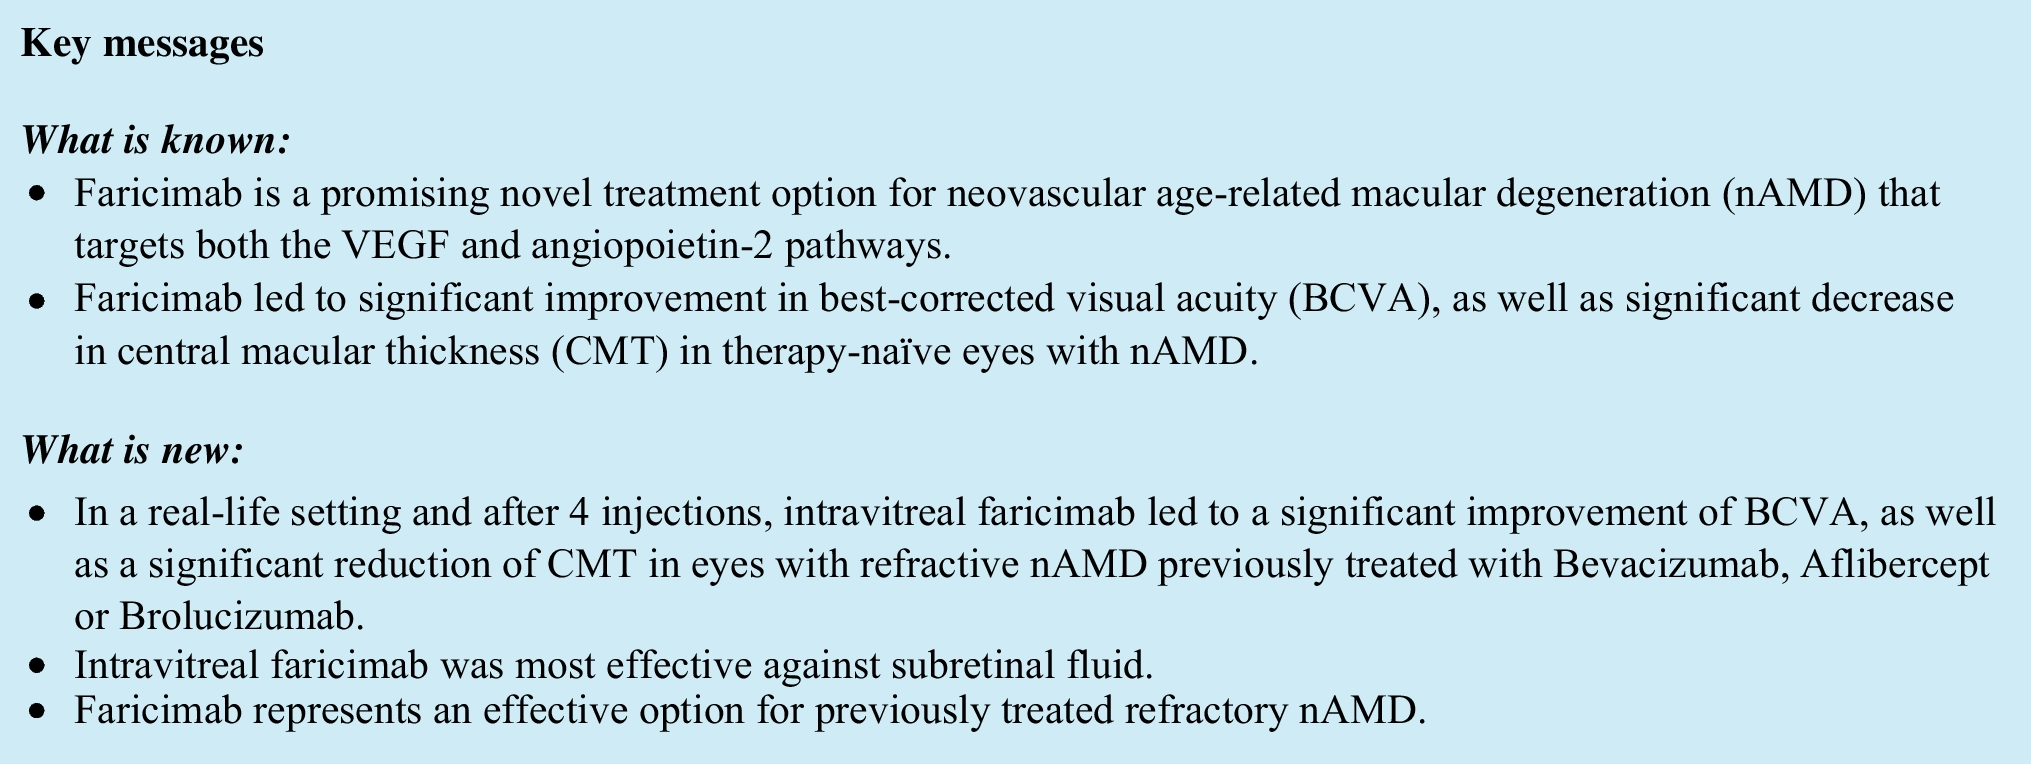 Short-term outcomes of intravitreal faricimab for refractory neovascular age-related macular degeneration